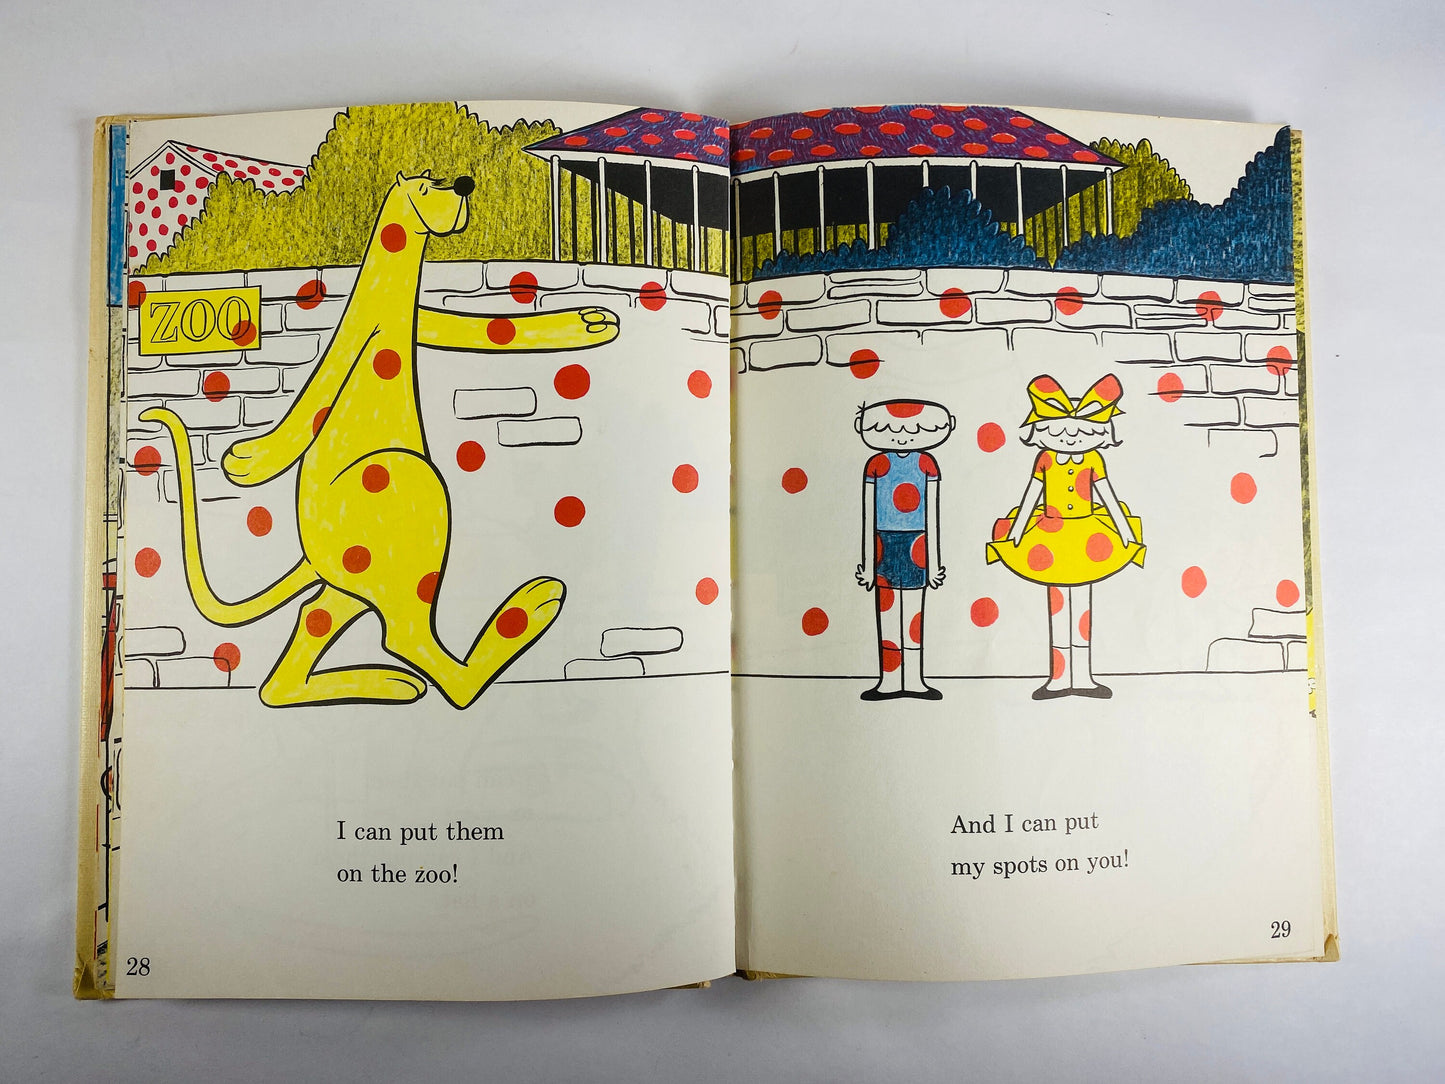 Put Me in the Zoo by Robert Lopshire vintage book by Dr Seuss circa 1960 Beginner Reader Book Club Edition